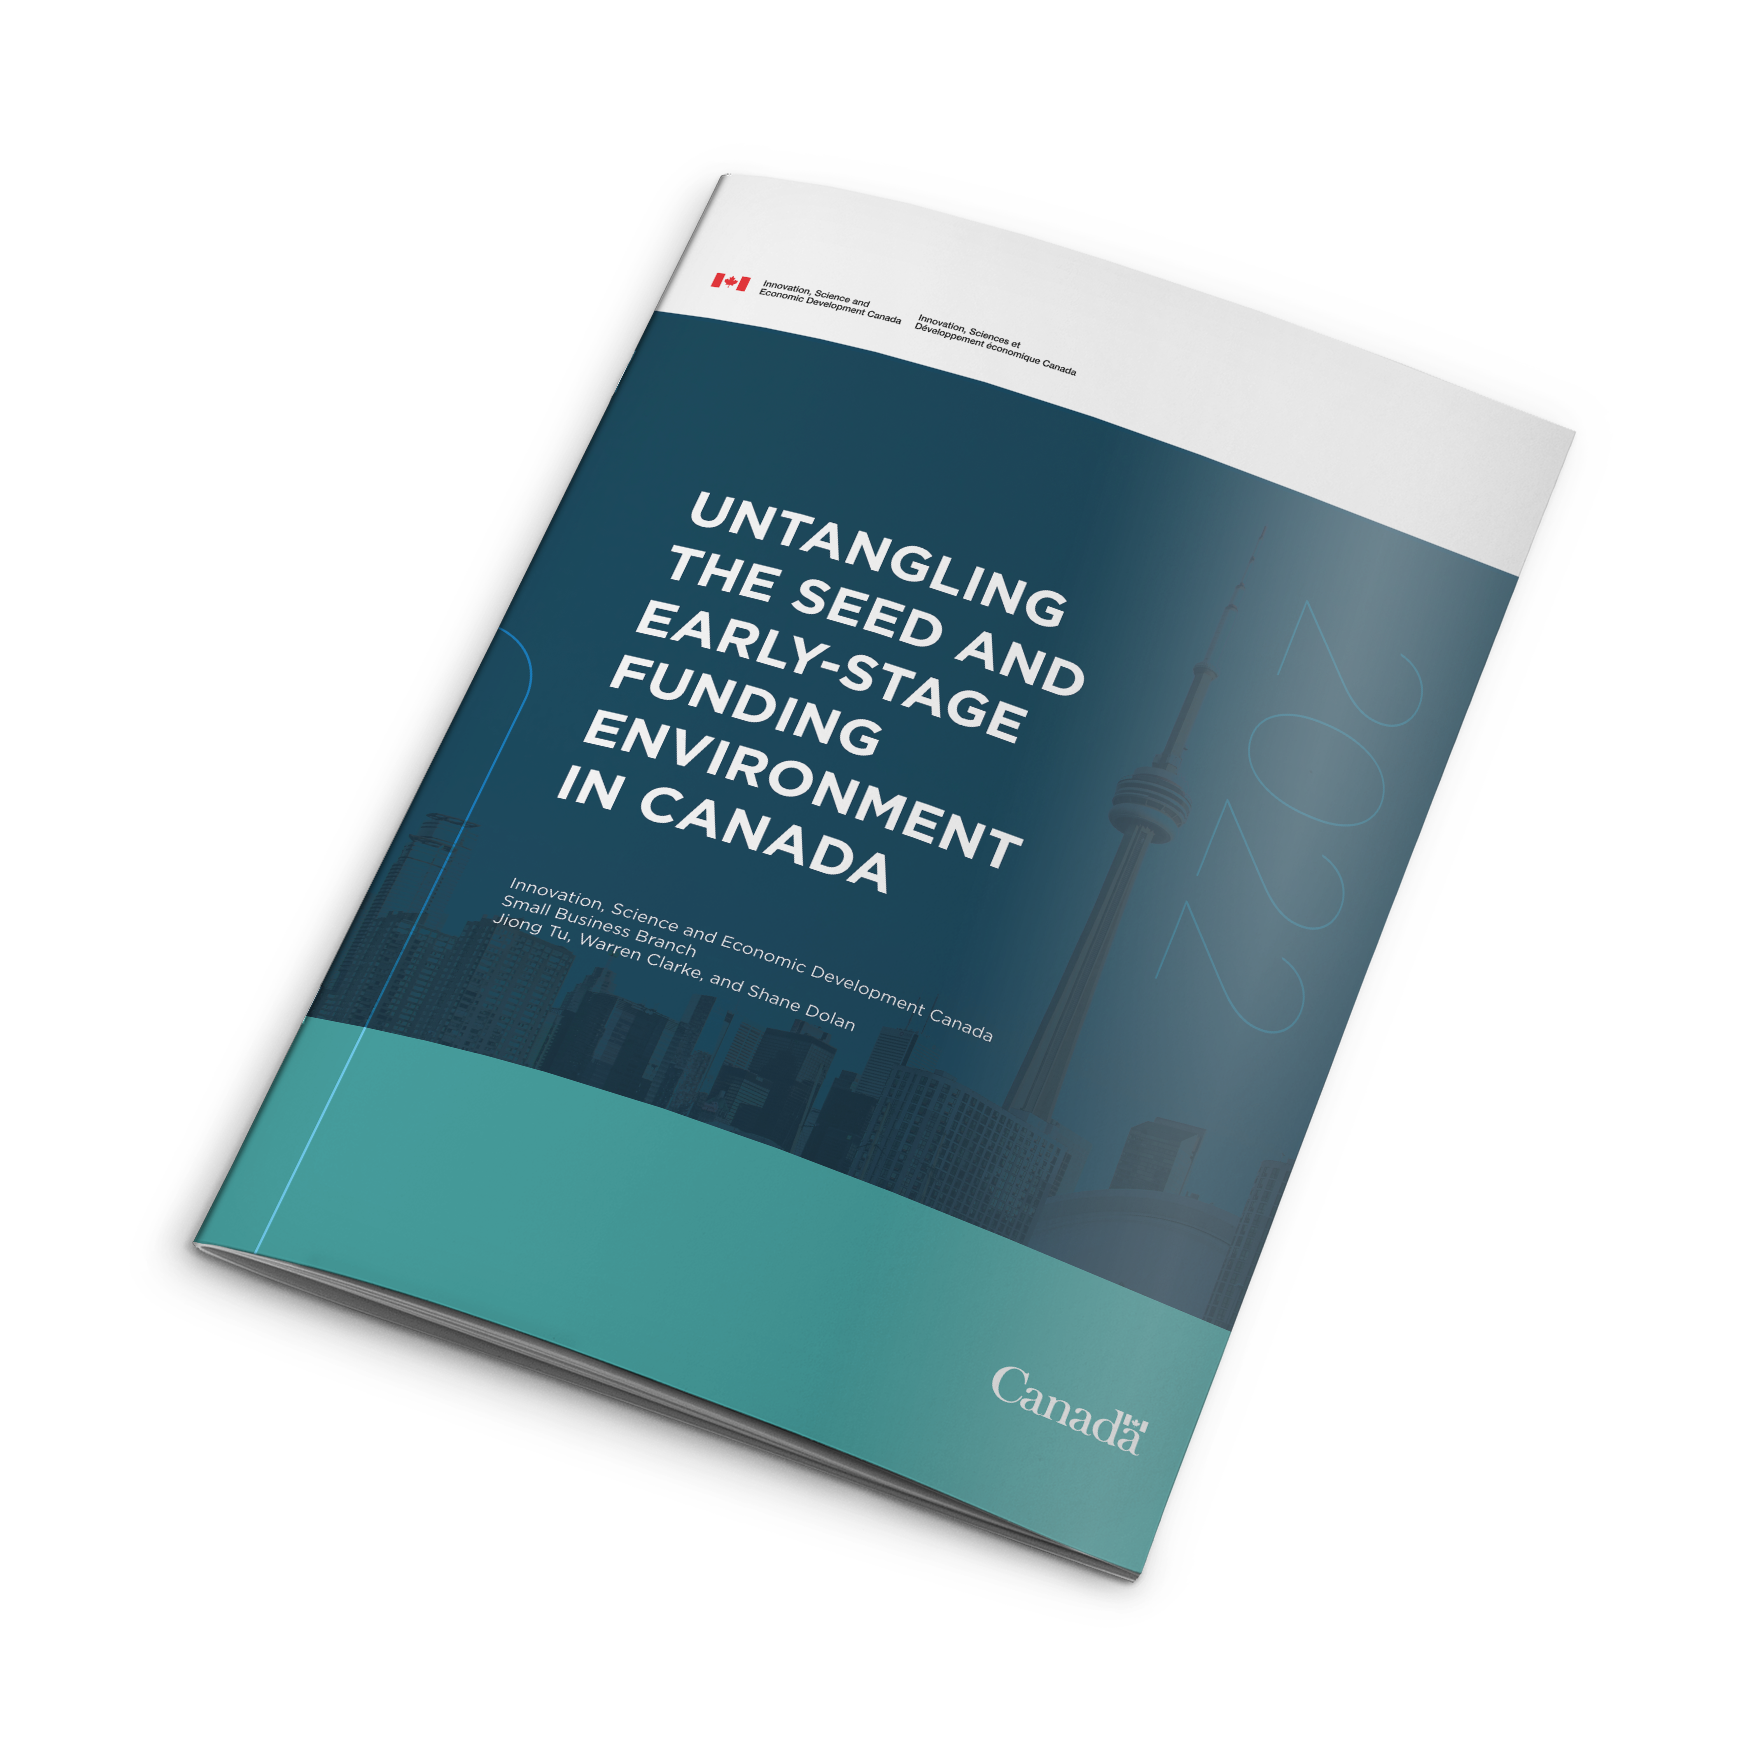 PDF cover Untangling the seed and early stage funding environment in Canada